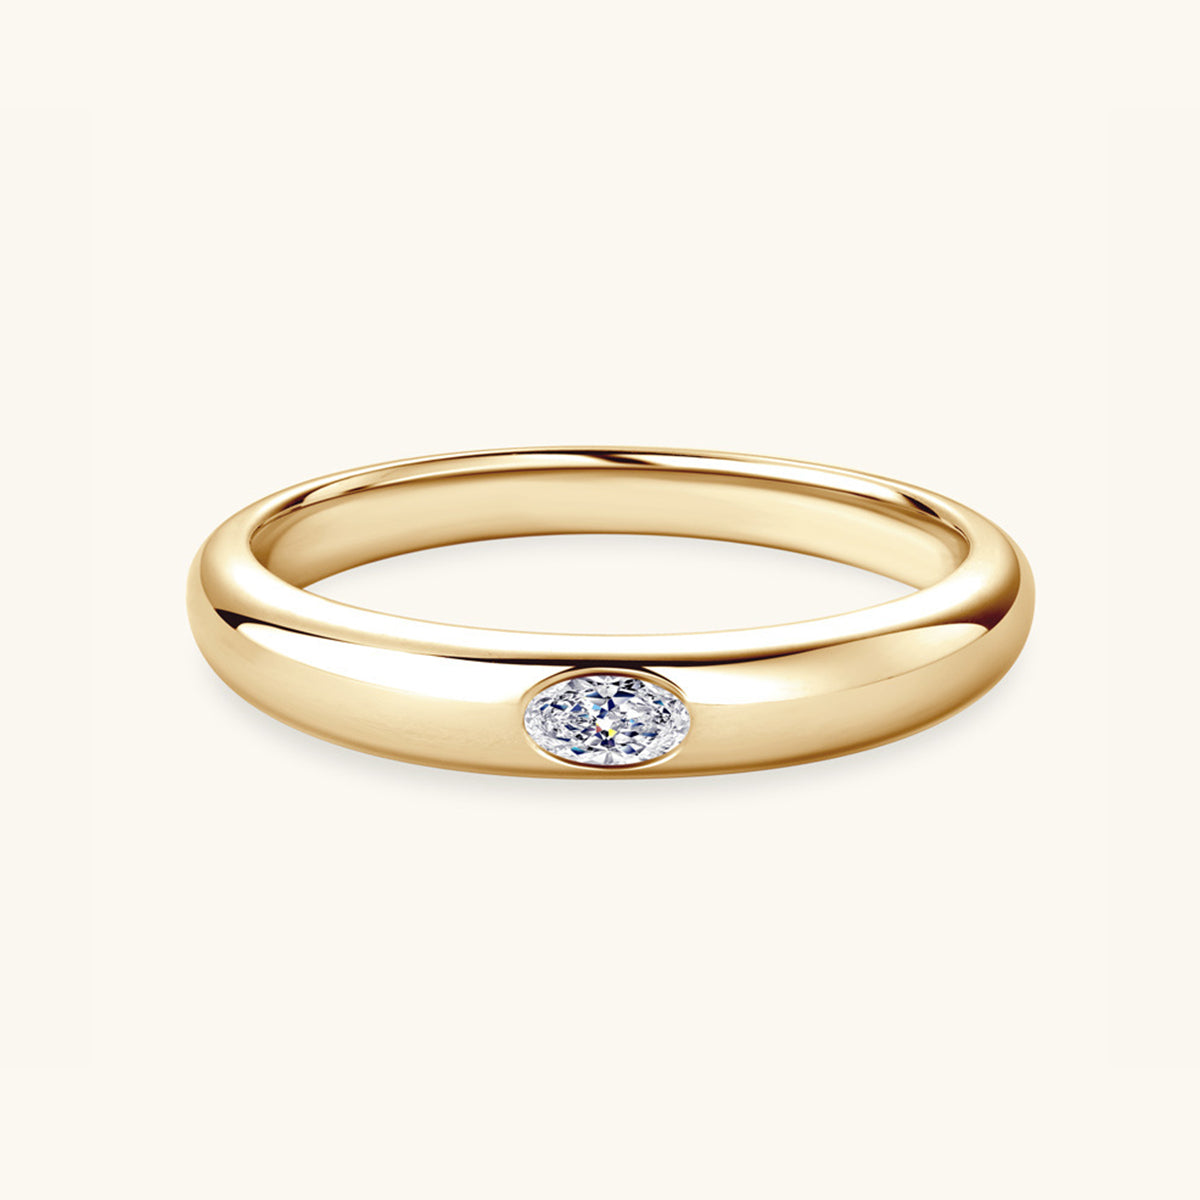 925 Sterling Silver Inlaid Oval Moissanite Band Gold Ring laying flat on white background.